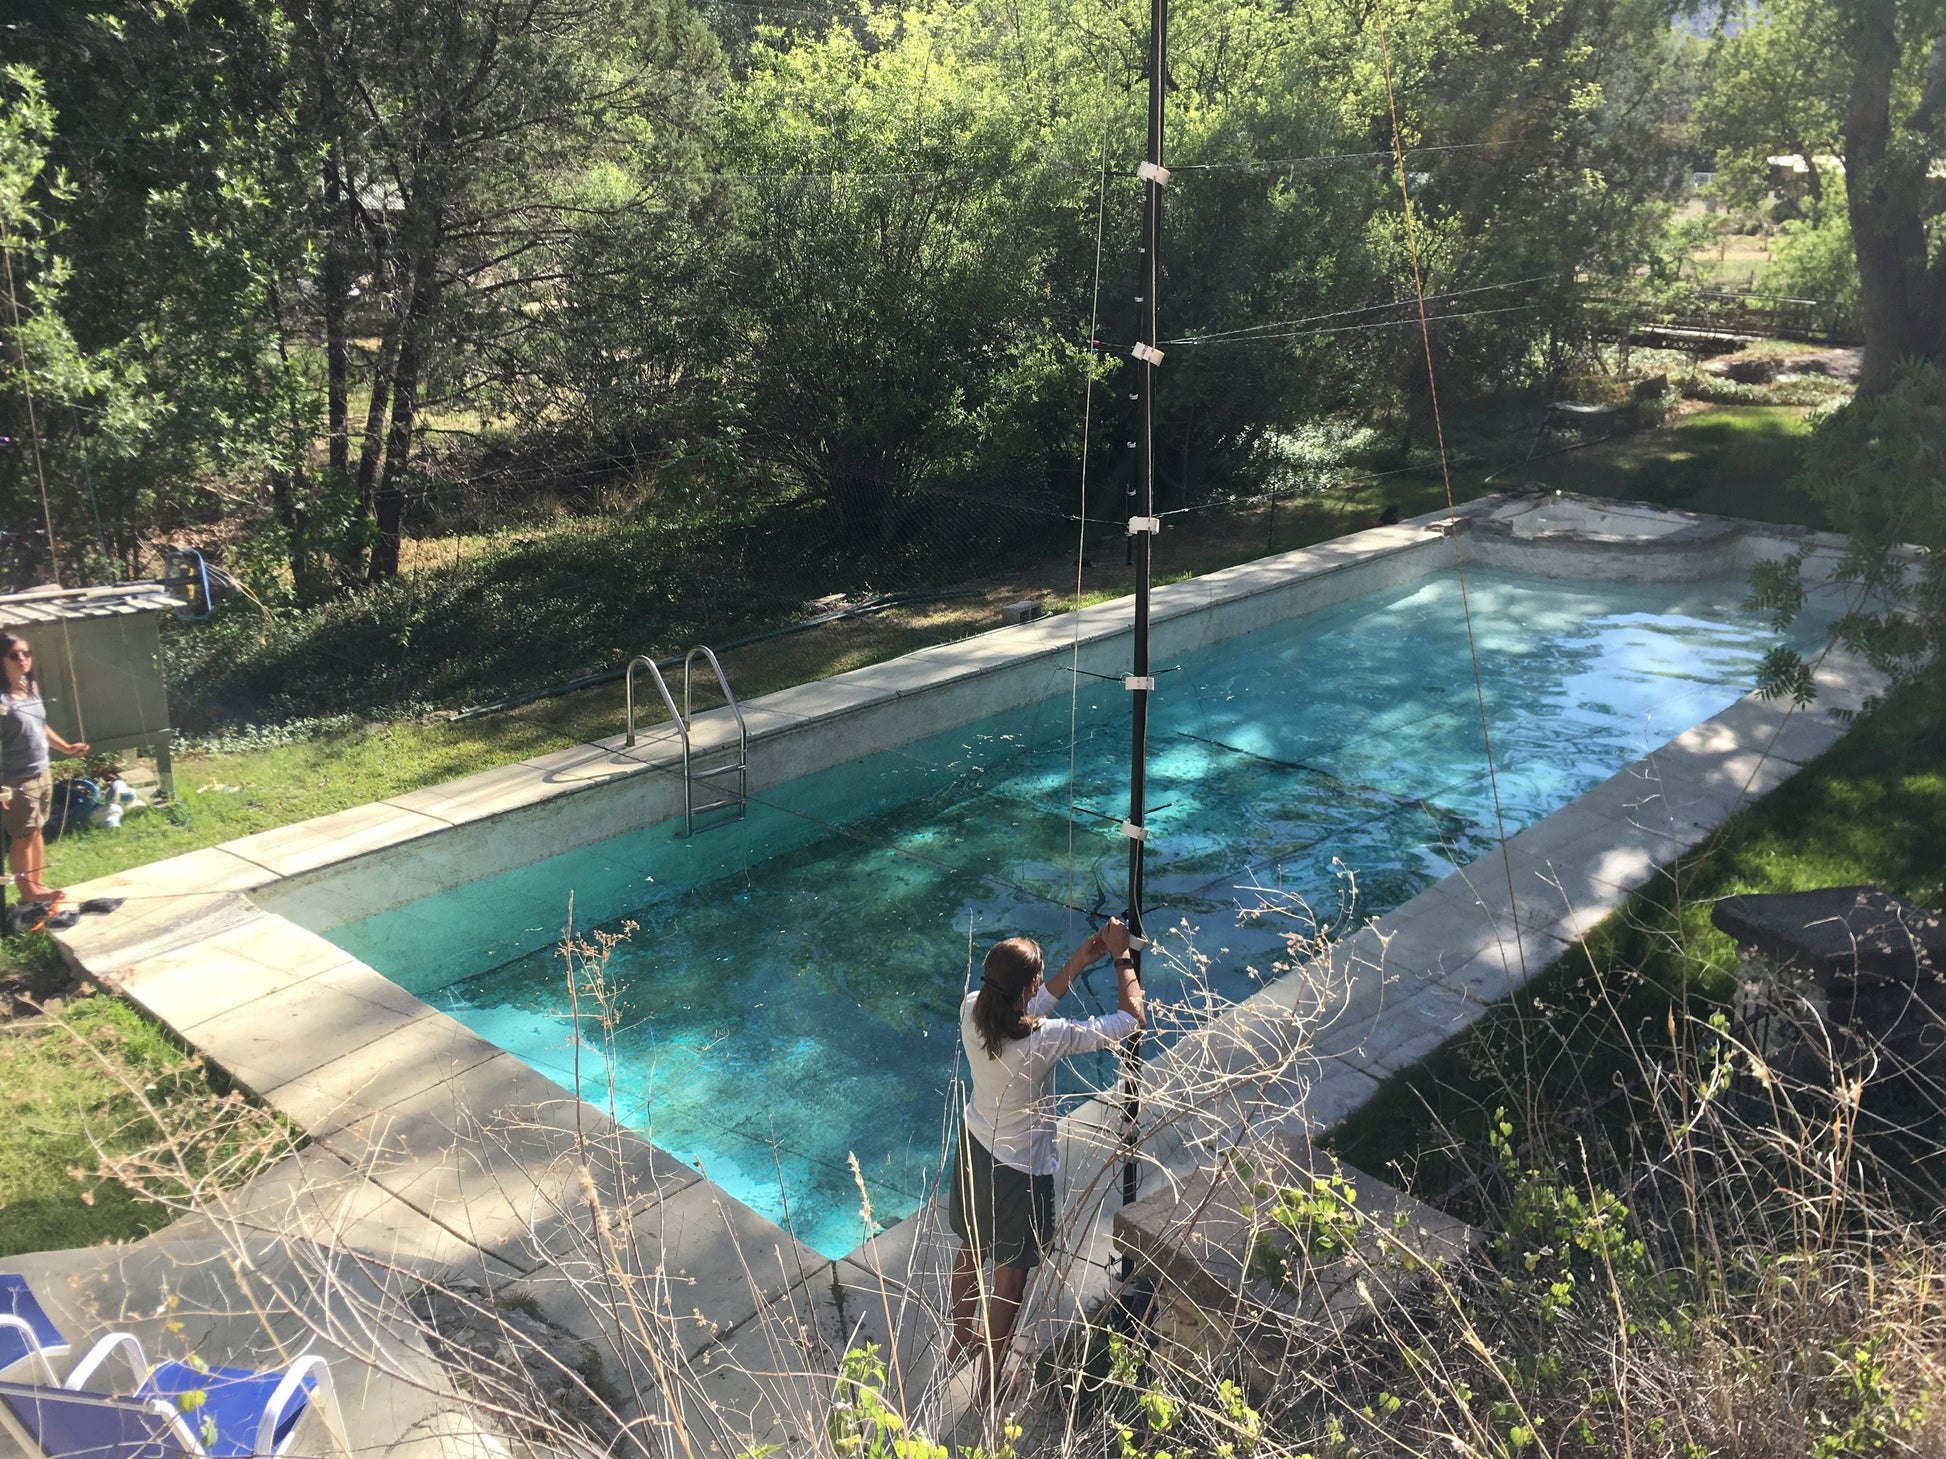 The spring-fed swimming pool at the Southwestern Research Station in Portal AZ has more historical bat capture records than any other location in AZ (and possibly the Nation).